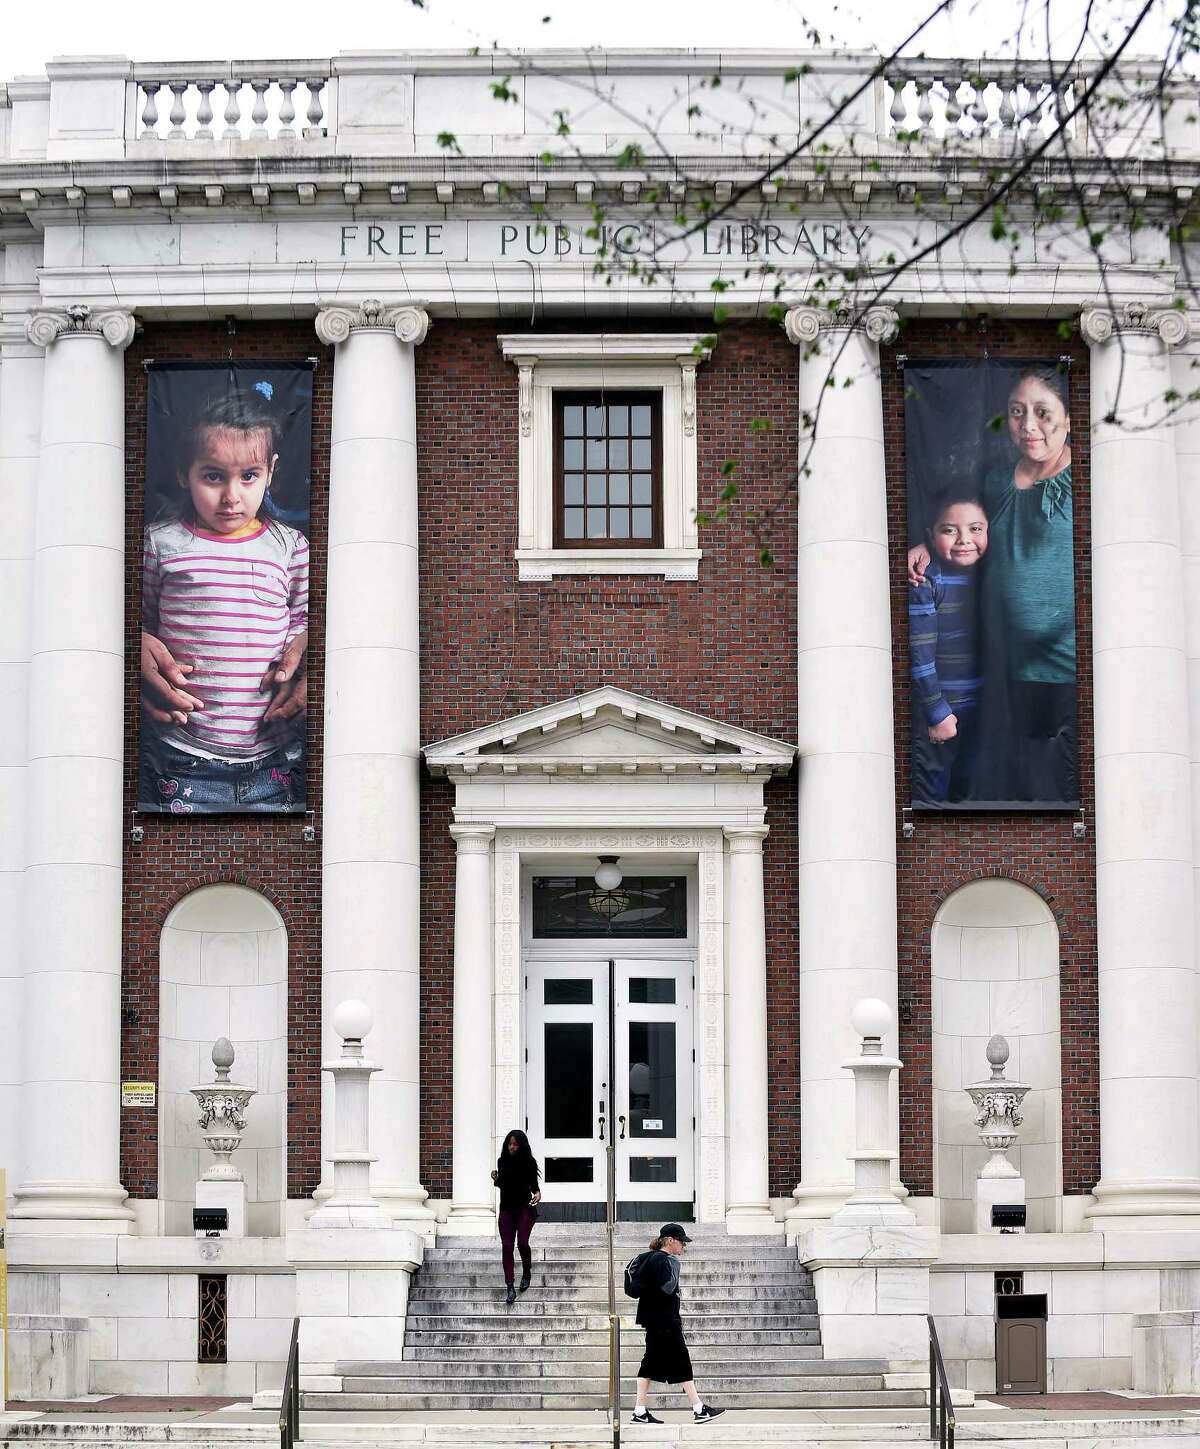 Photographs of immigrants hang in the front of the New Haven Free Public Library.